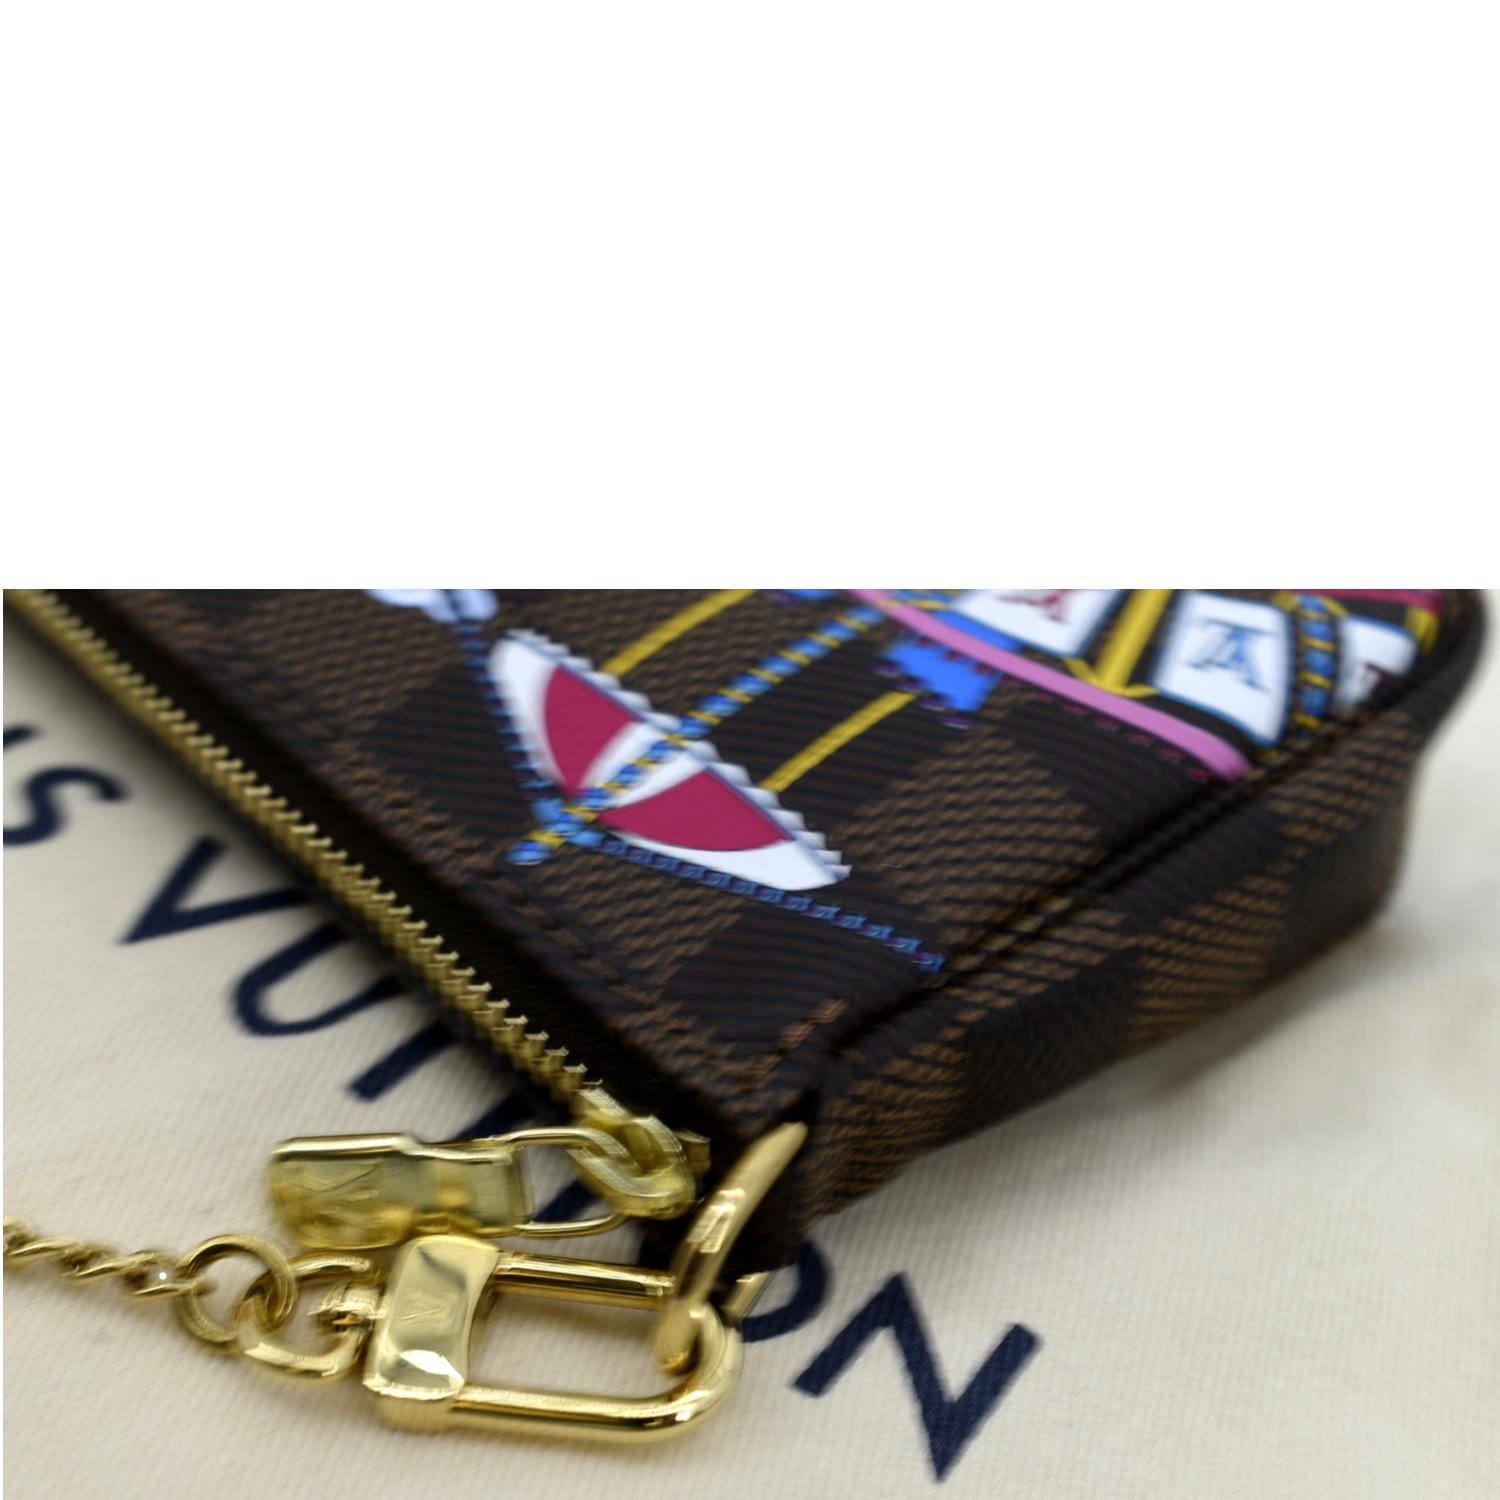 Neverfull GM with LV scarf and Vivienne Christmas animation bag